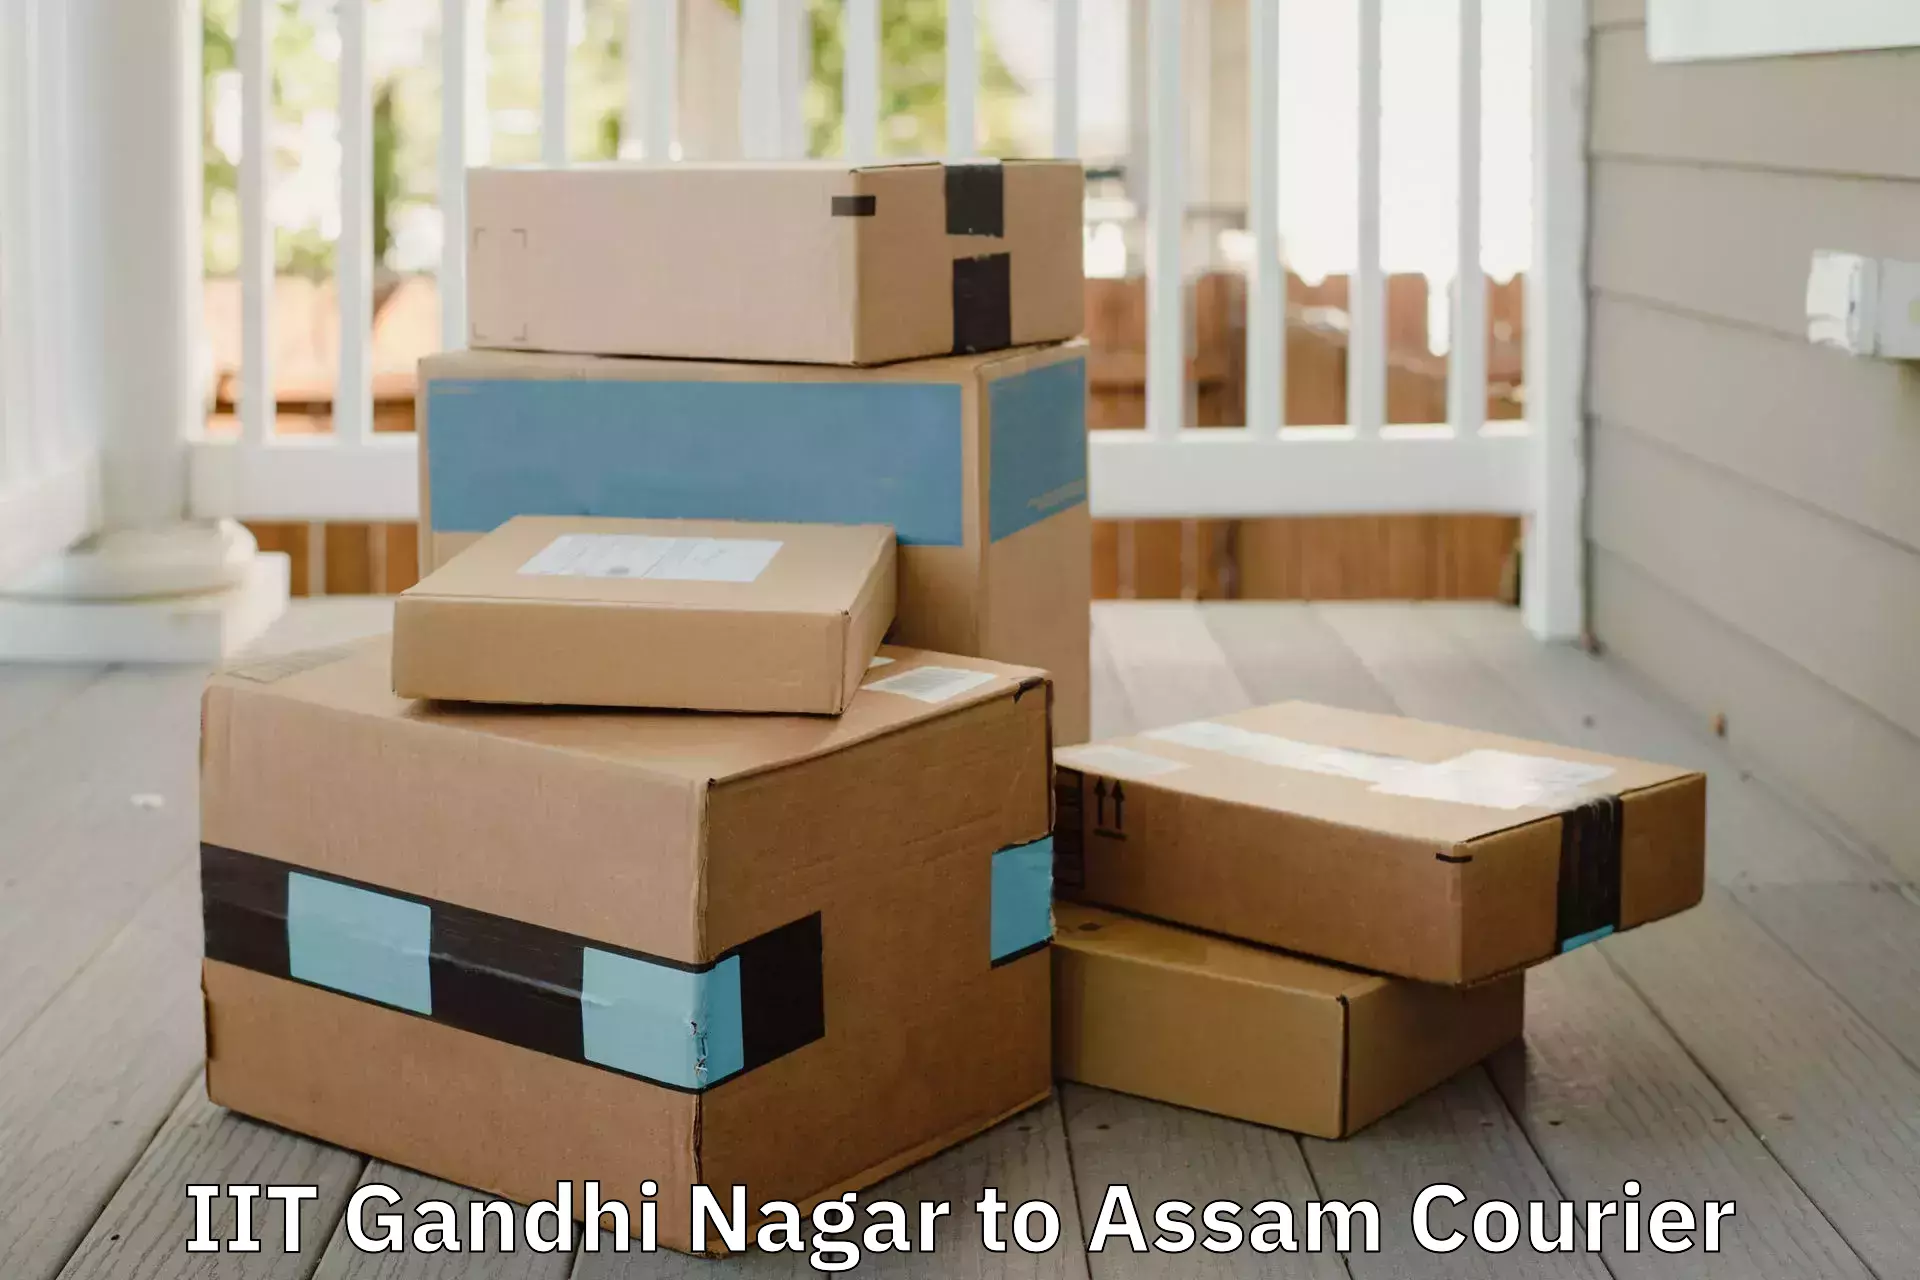 Affordable relocation services IIT Gandhi Nagar to Digboi